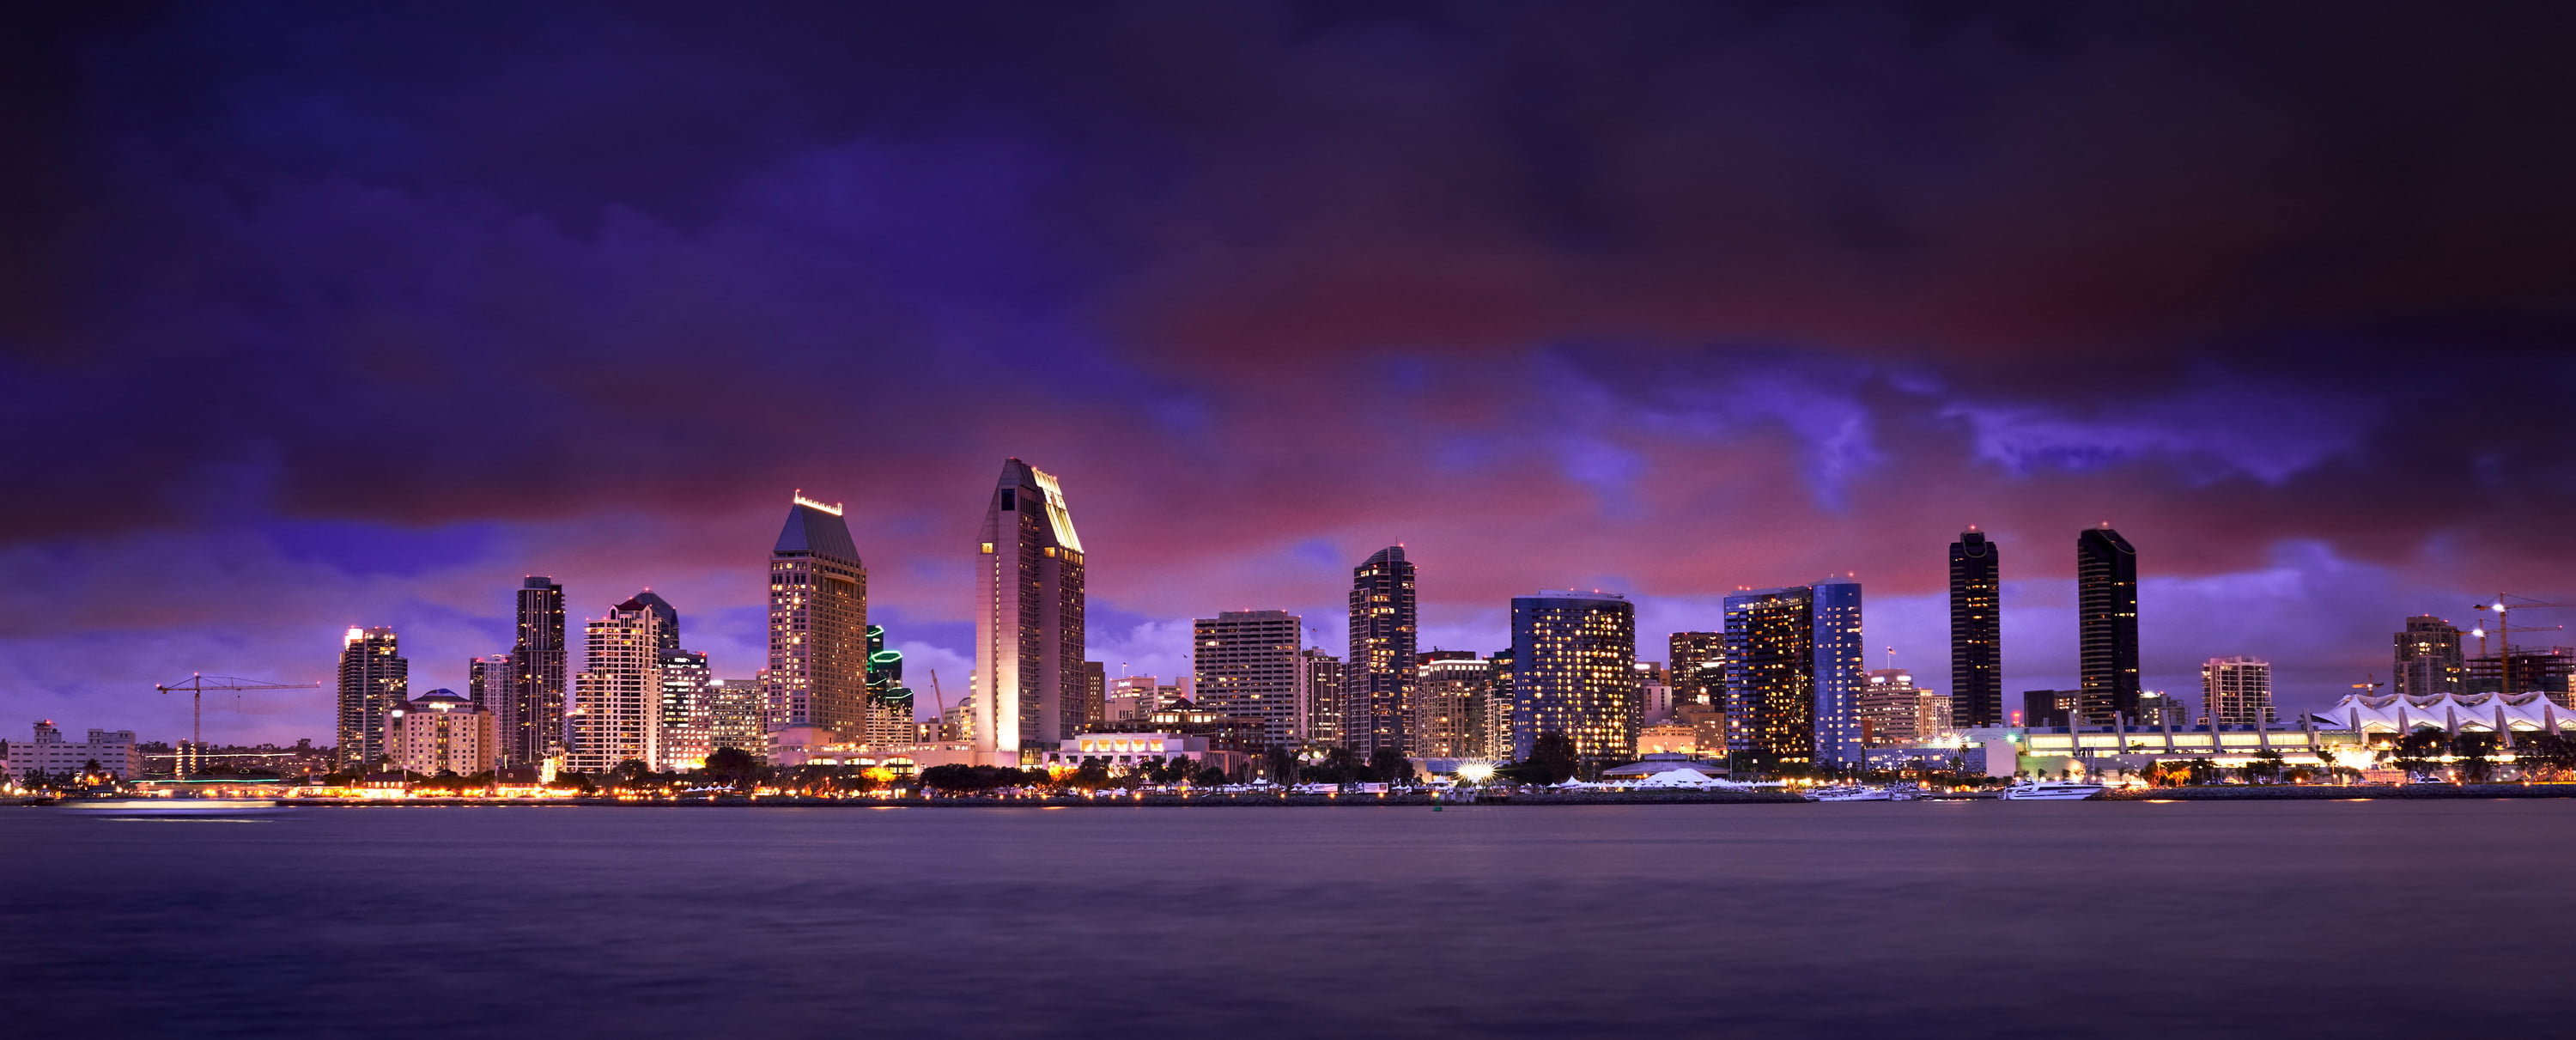 San Diego leads the world in developing and deploying “Smart City ...